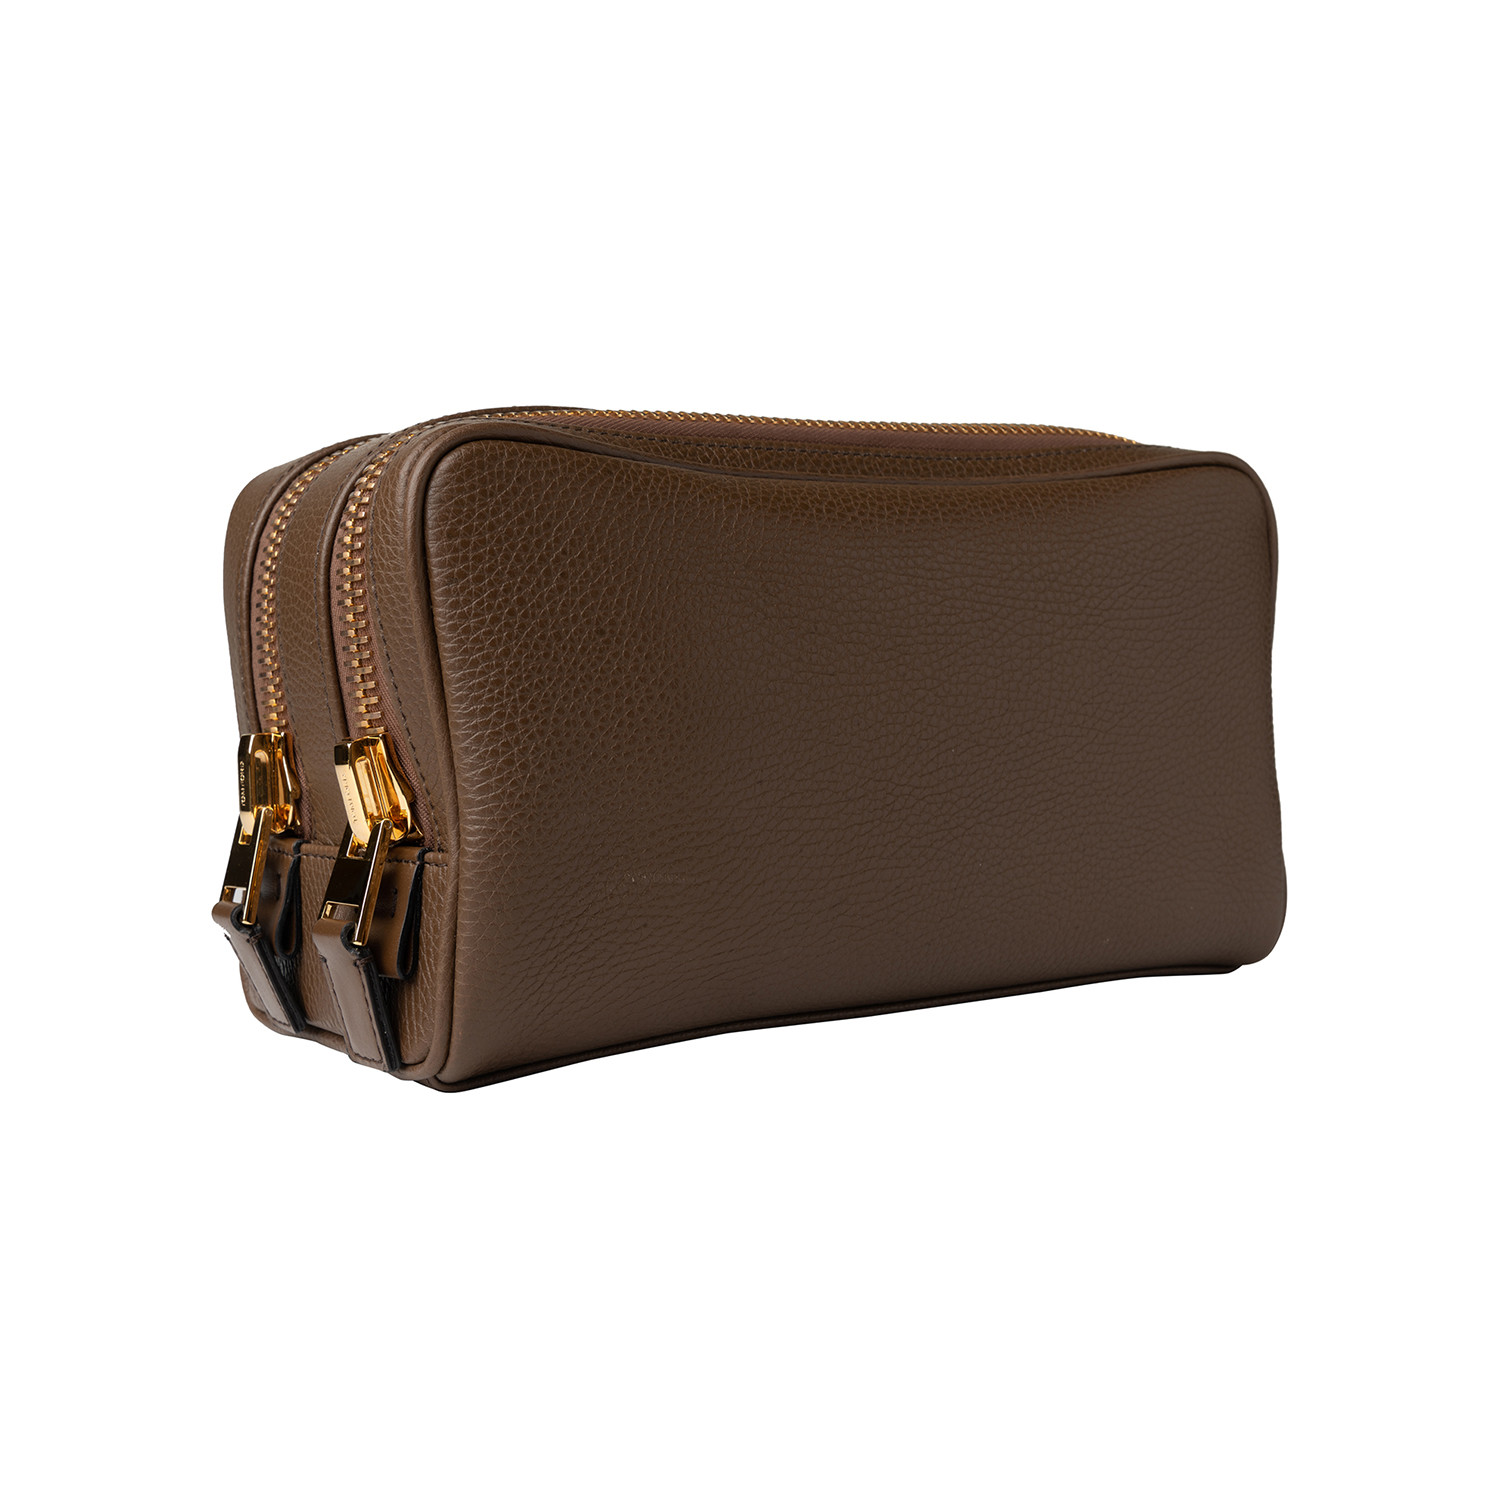 Men's Leather Double Zip Toiletry Bag // Reddish Brown - Tom Ford ...